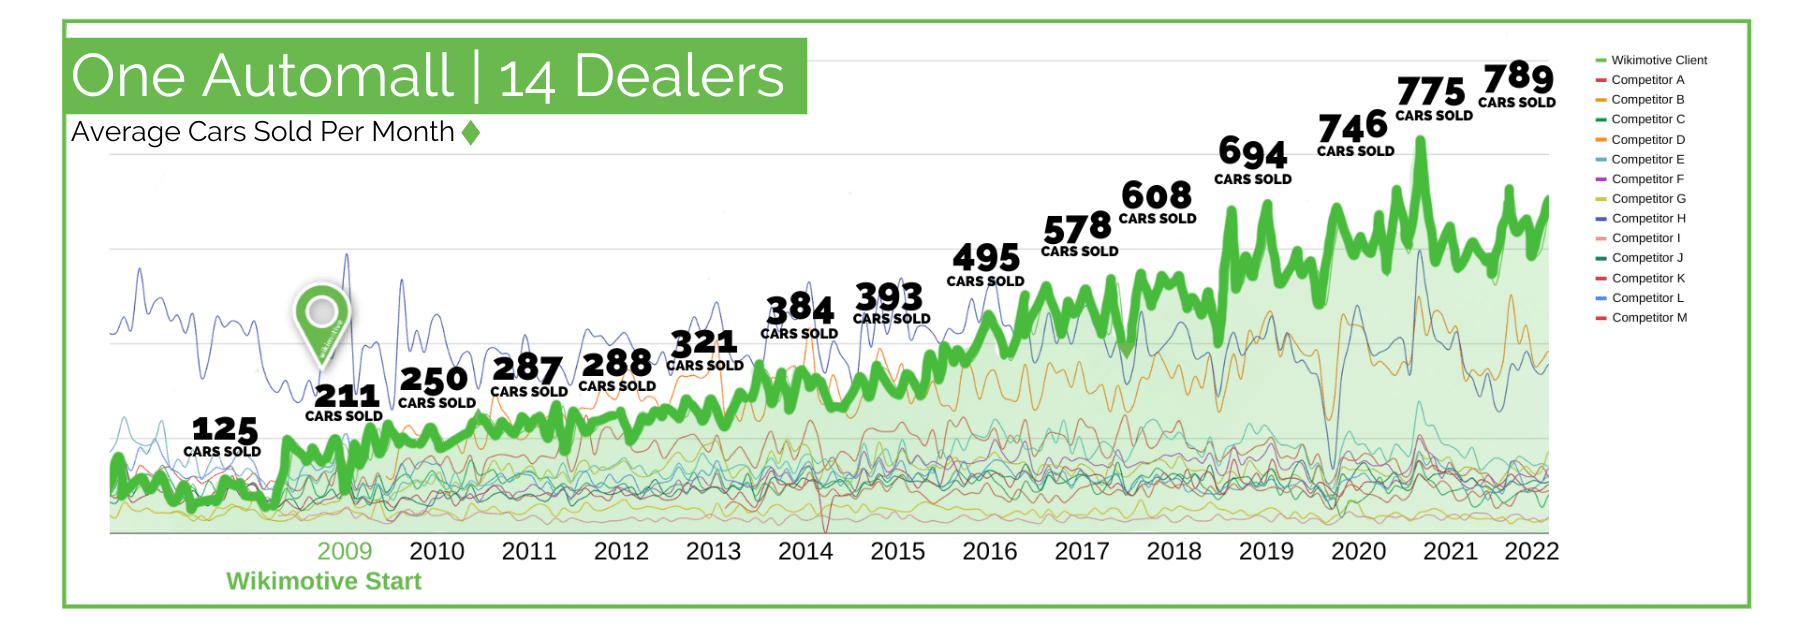 Sell More Cars This Year (Even When the Market Says "No")